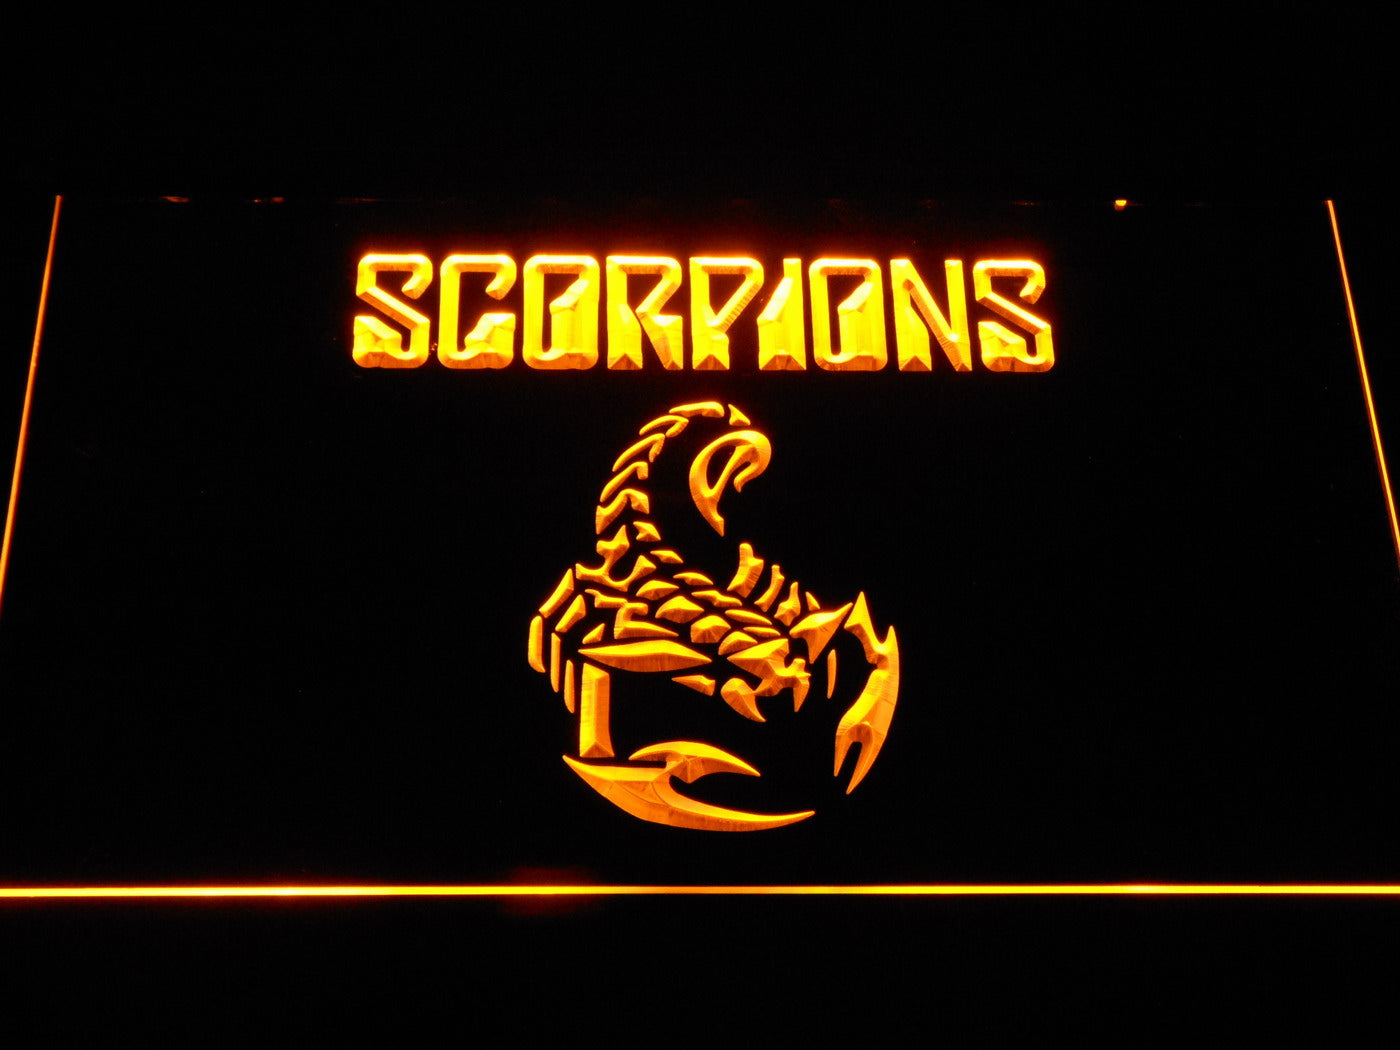 Scorpions Band LED Neon Sign